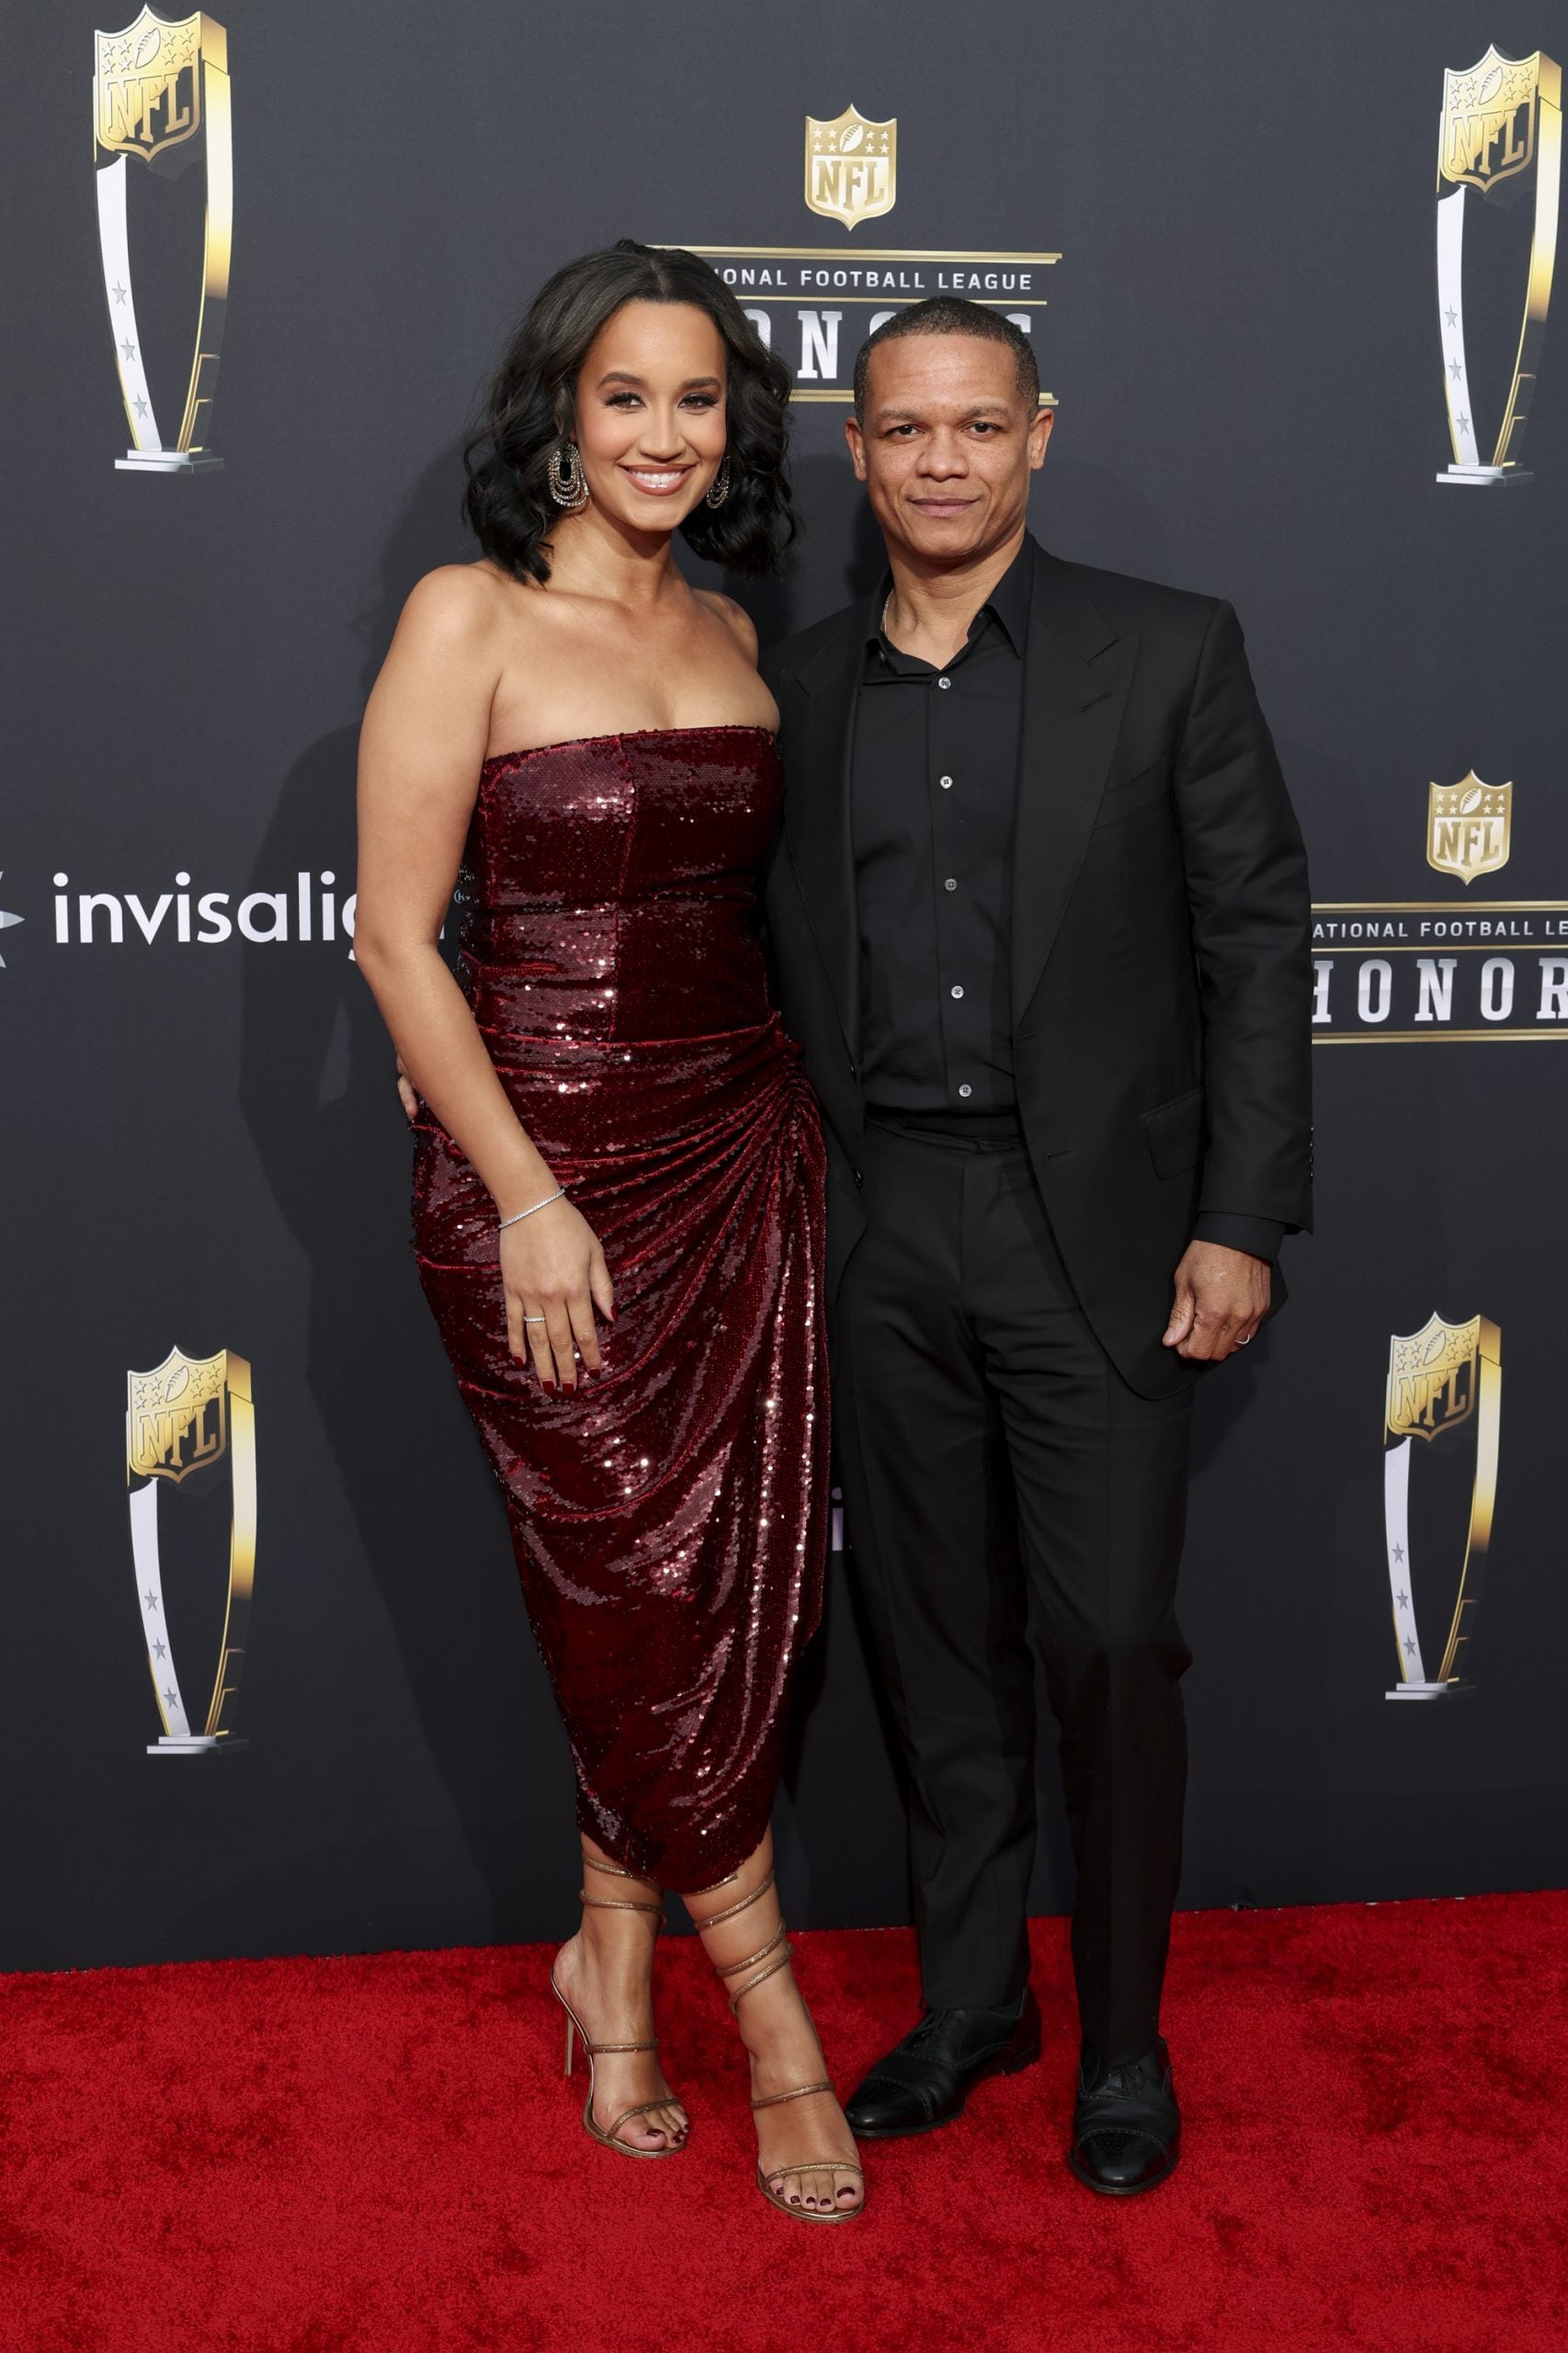 Black Love Was All Over The Red Carpet At The 2024 NFL Honors